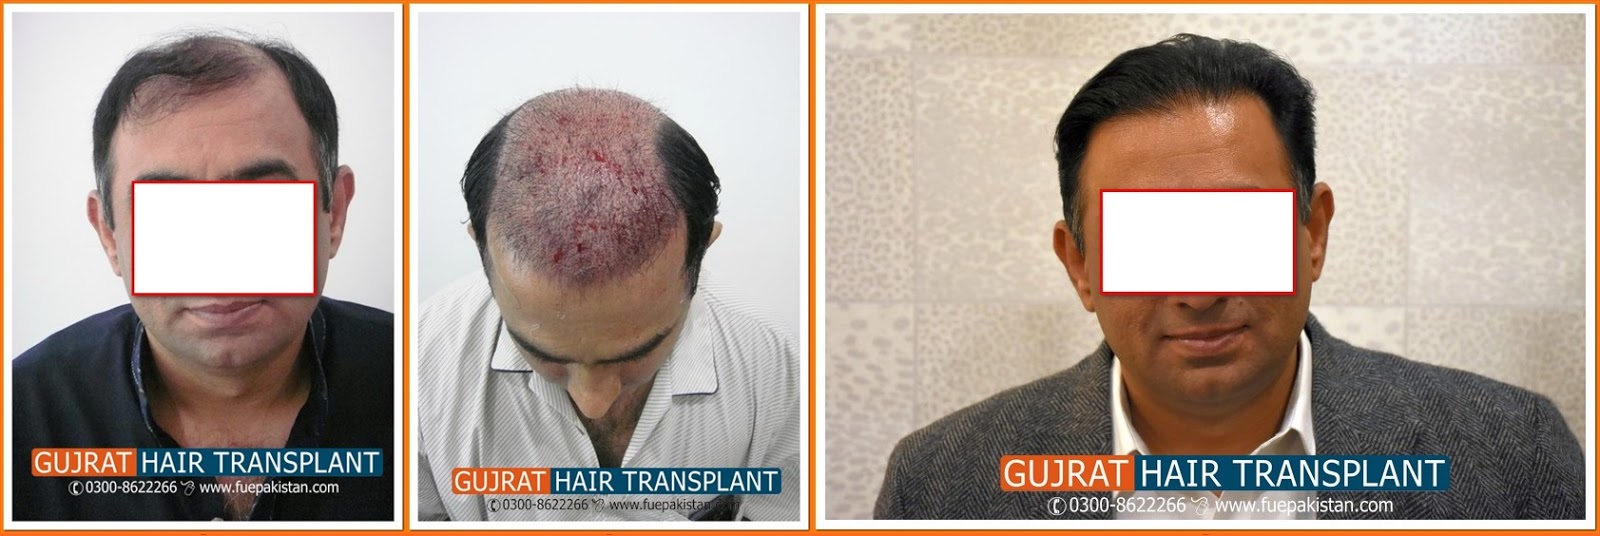 Follicular Unit Extraction Fue In Pakistan Fue Hair Transplant In